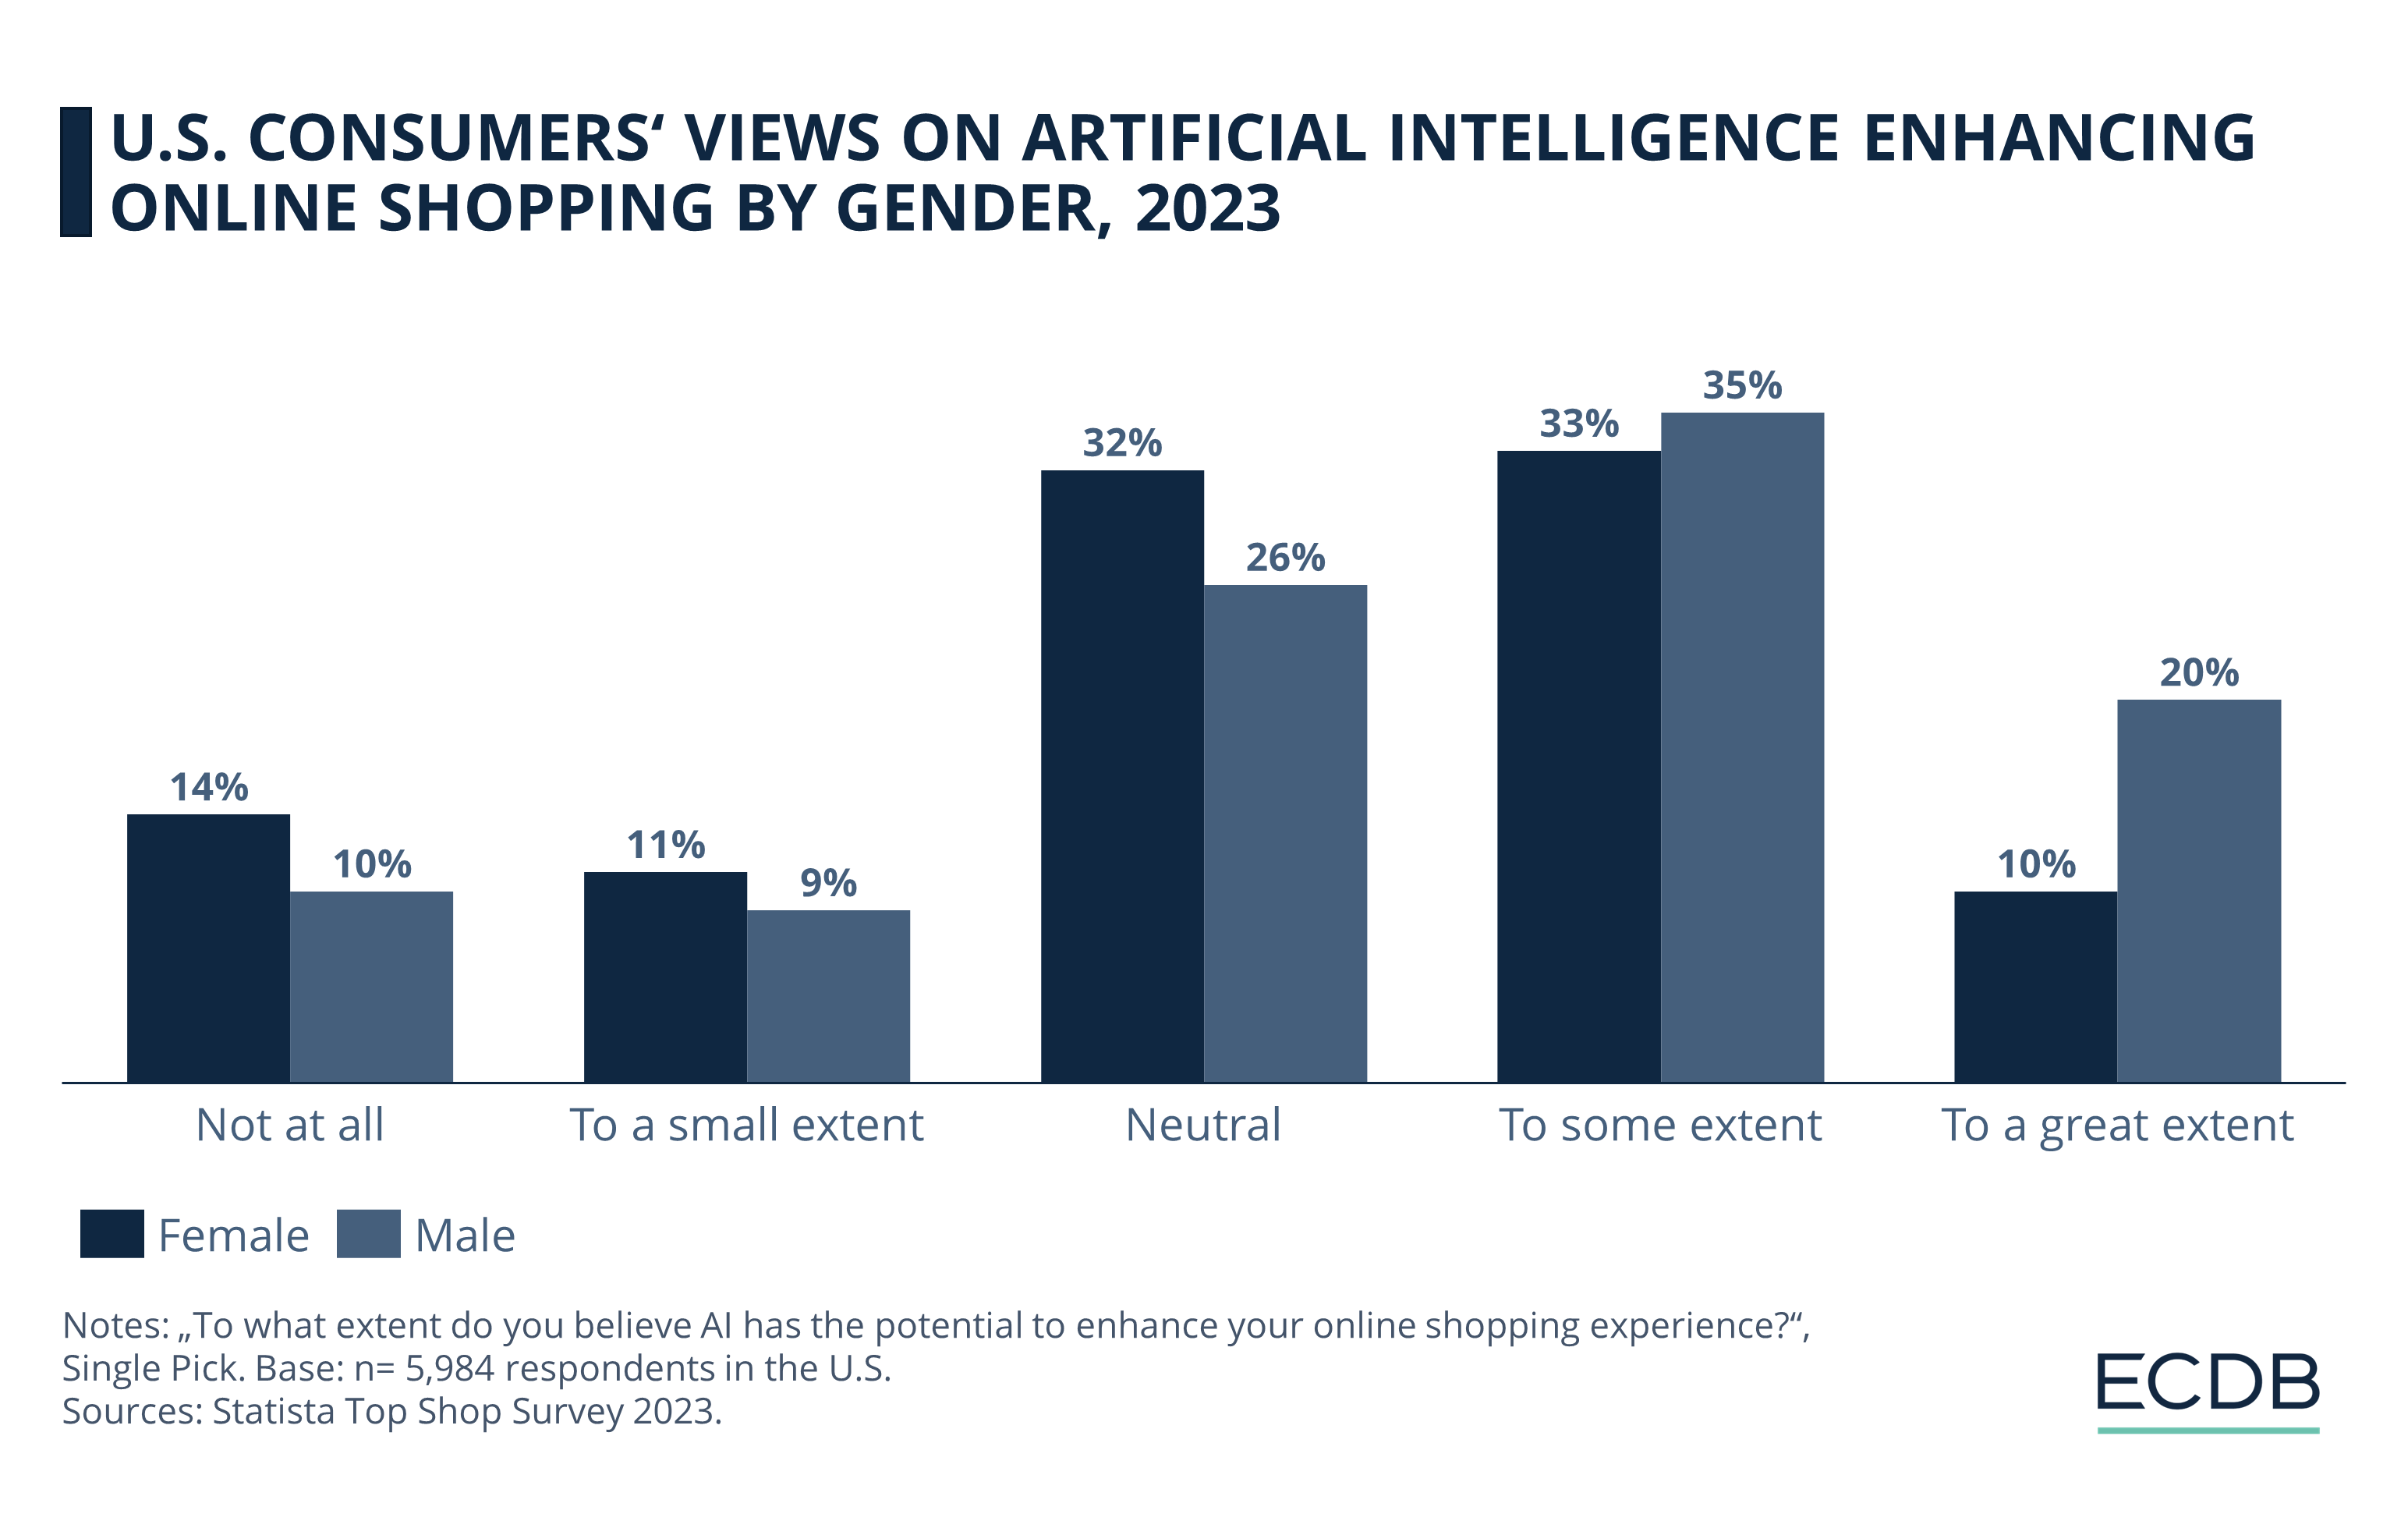 U.S. Consumers' View on Artificial Intelligence Enhancing Online Shopping by Gender, 2023